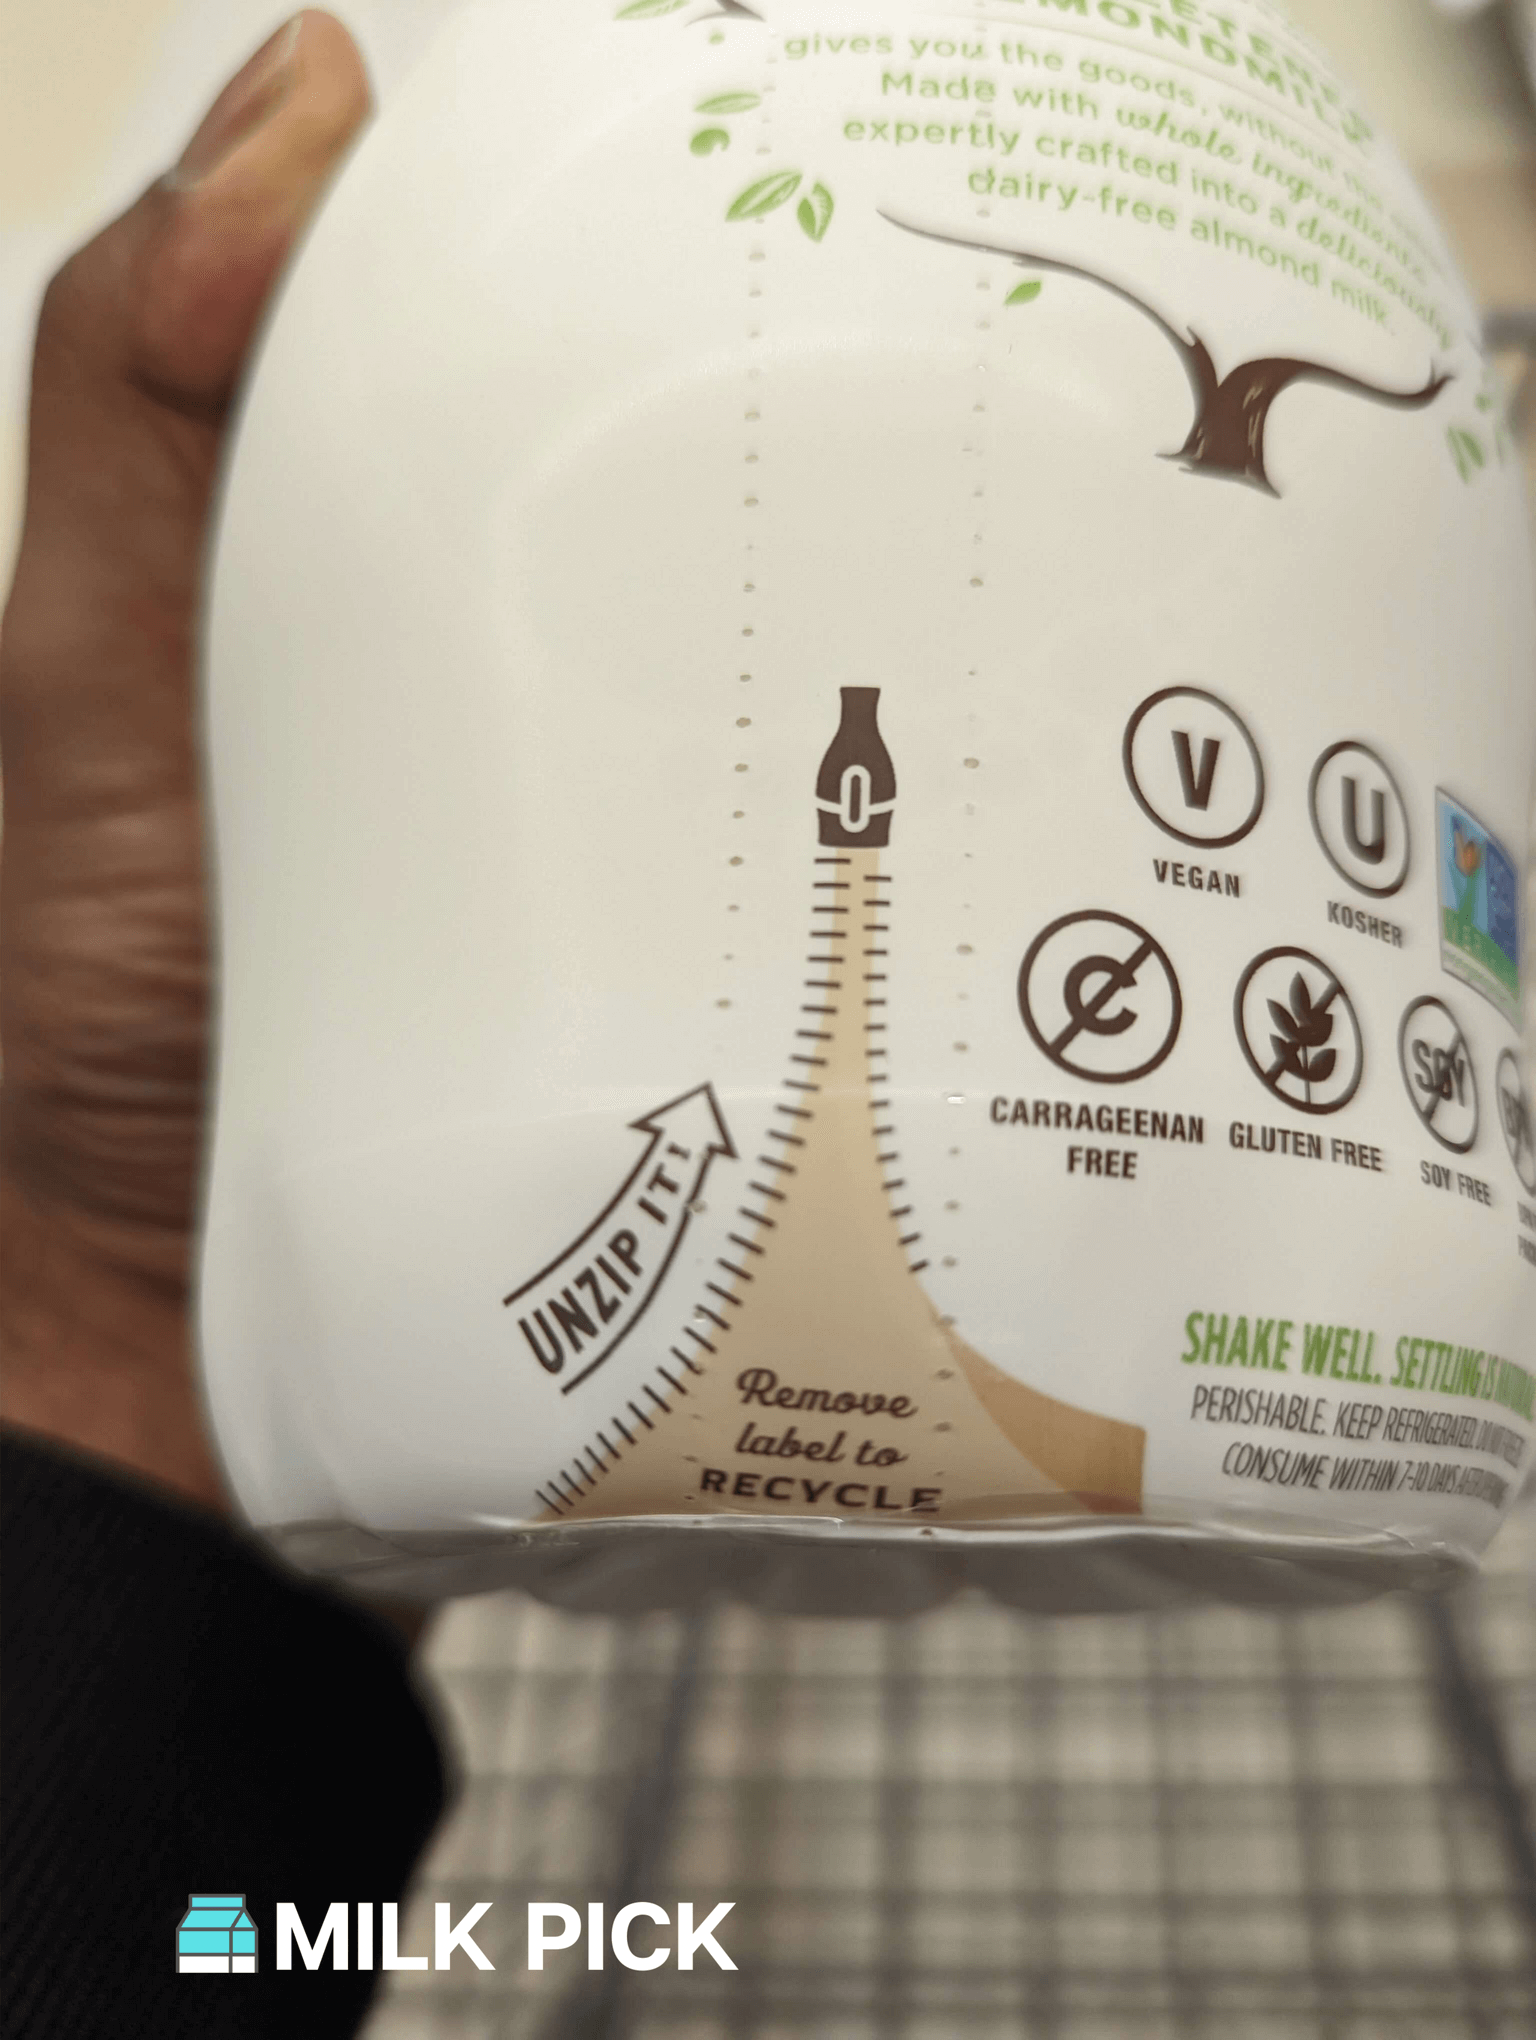 remove label to recycle label on califia farms almond milk